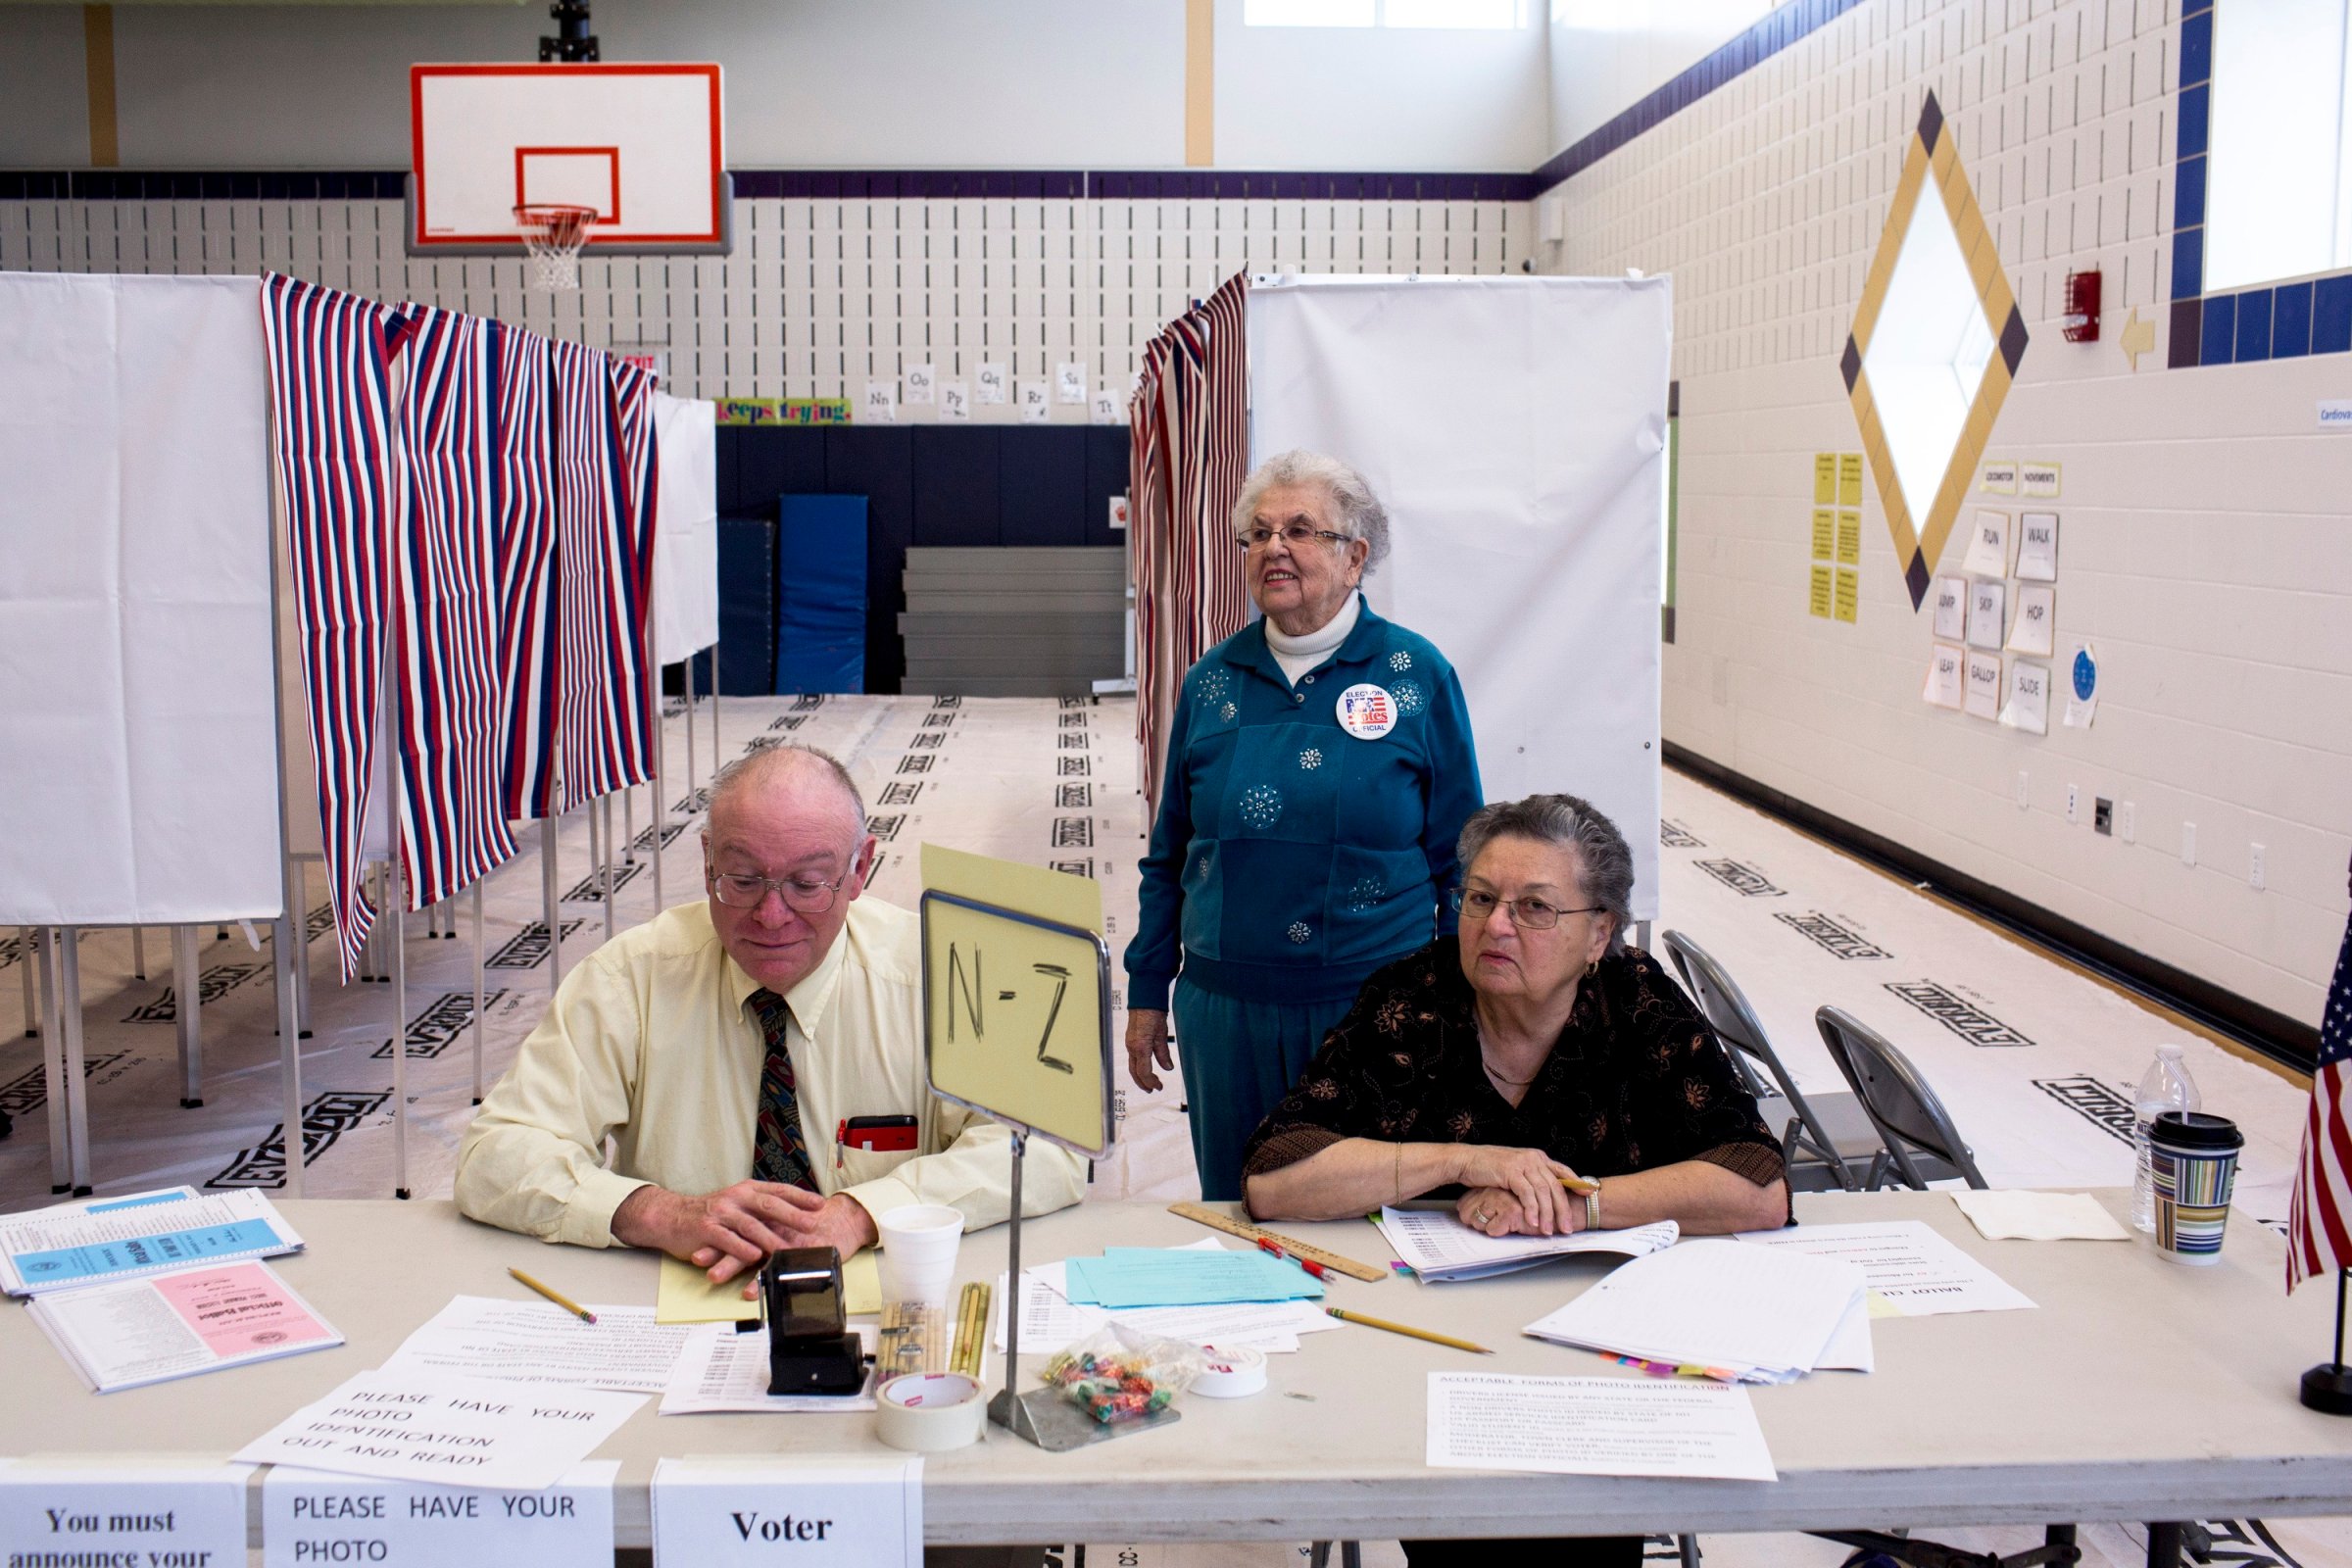 New Hampshire Volunteers staff a polling station at Windham High School on Feb. 9, 2016, in Windham, N.H.